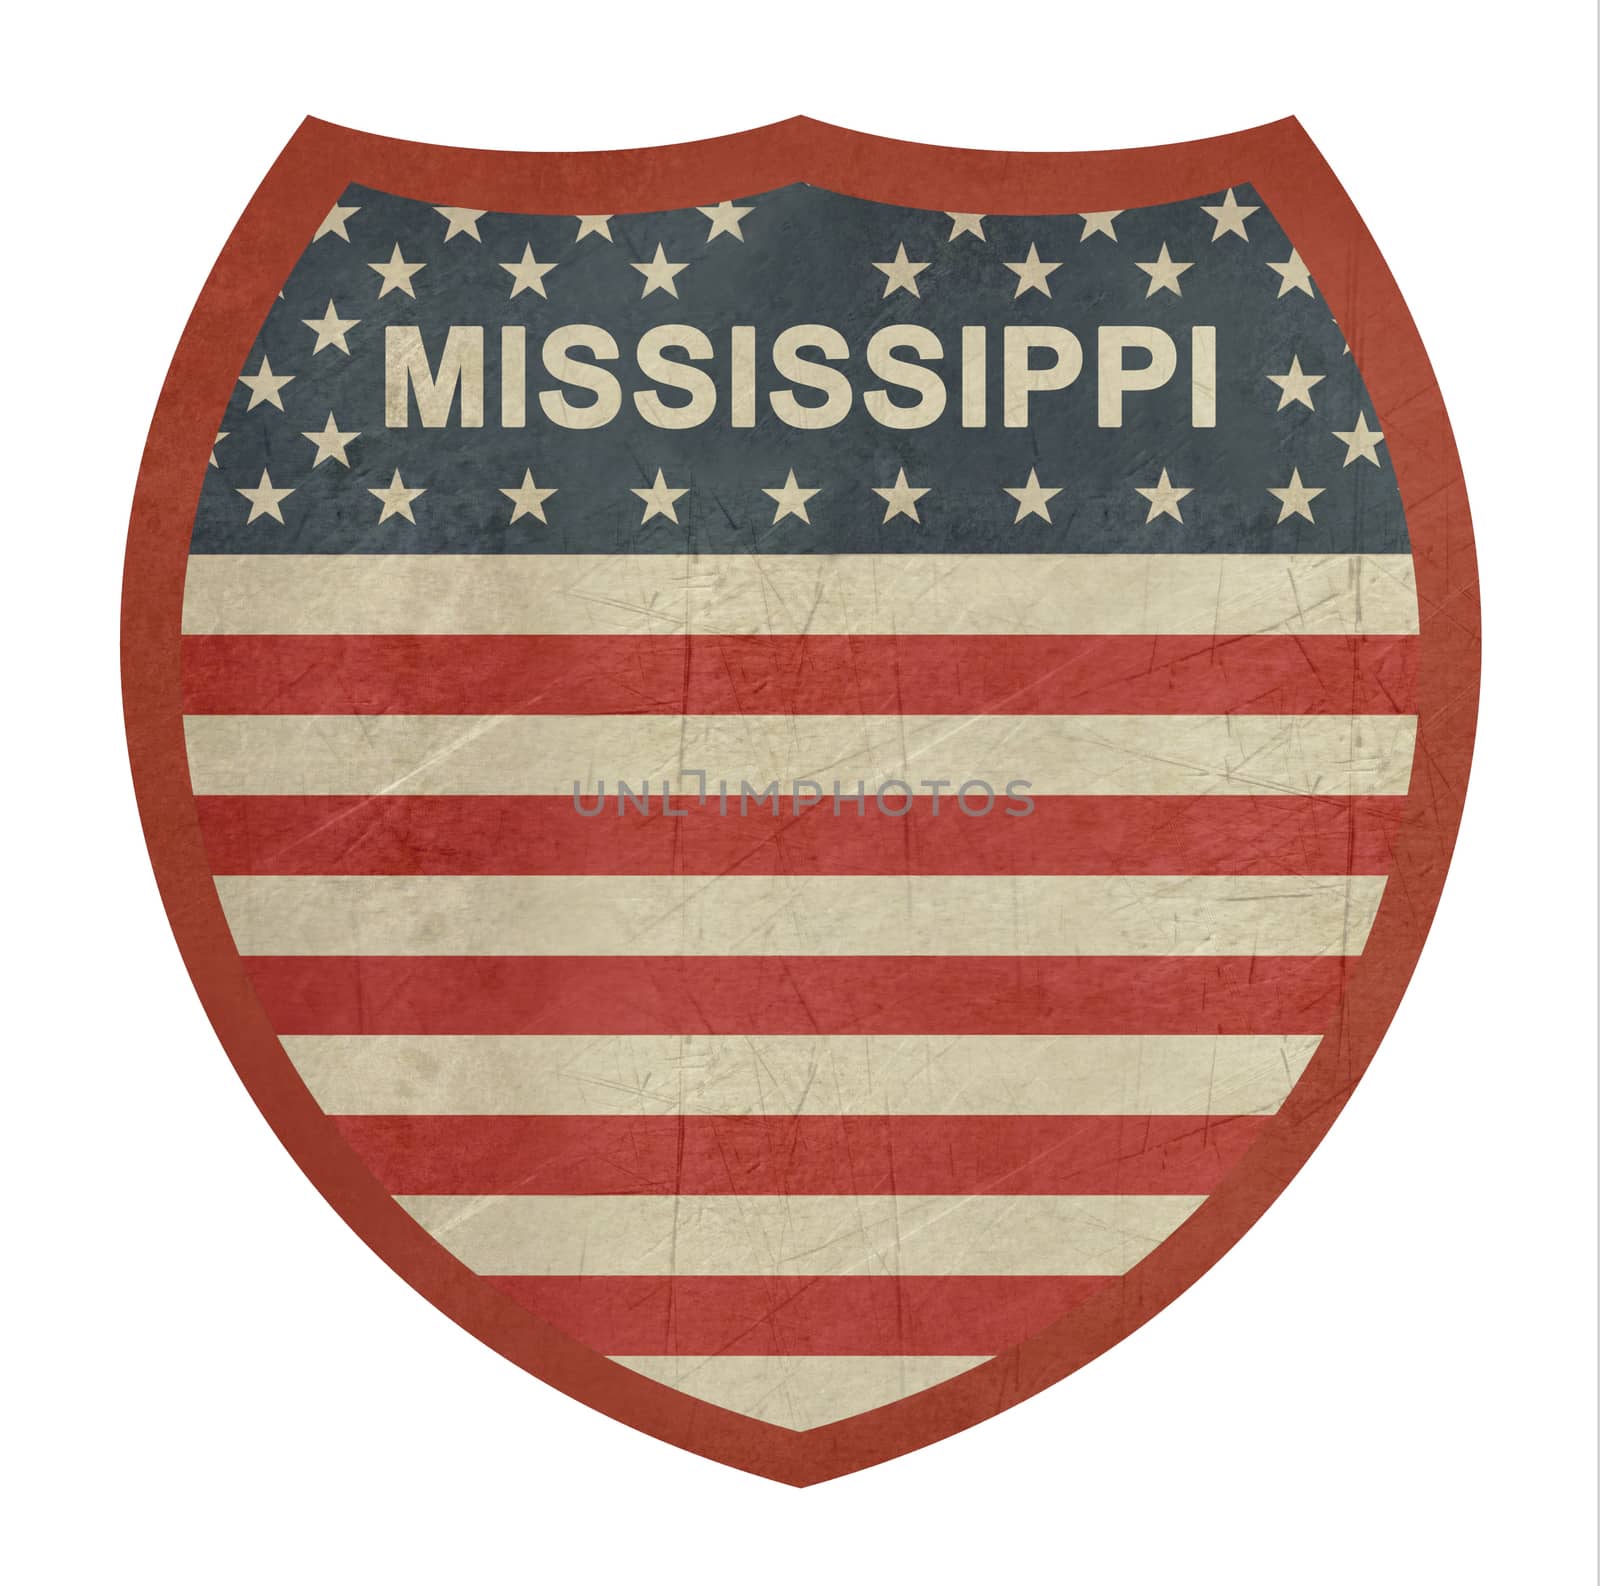 Grunge Mississippi American interstate highway sign isolated on a white background.